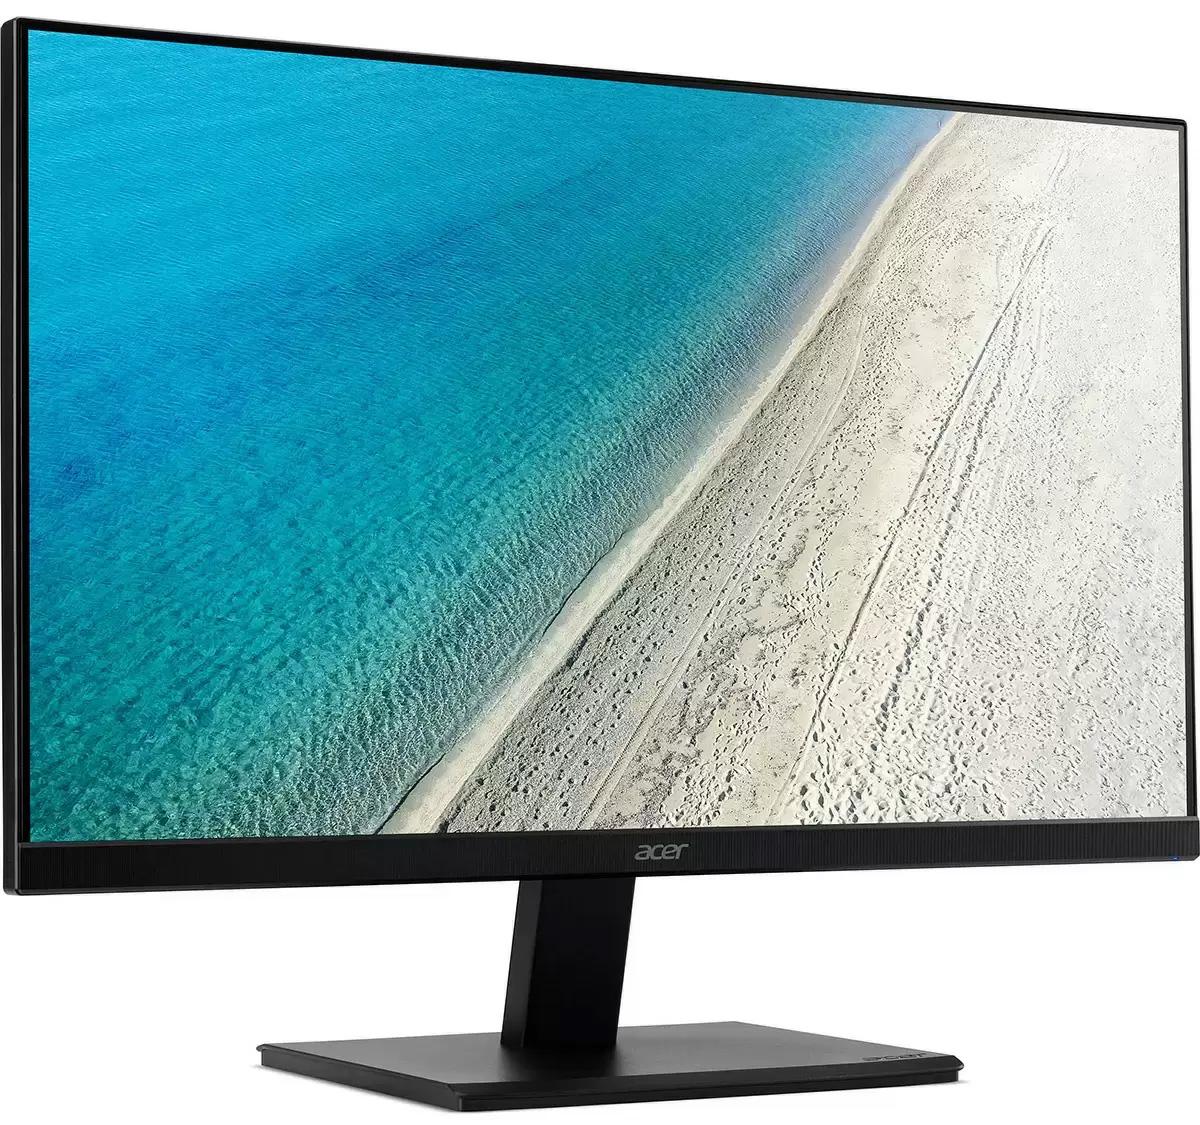 27in Acer V277U FreeSync IPS Monitor for $199.99 Shipped